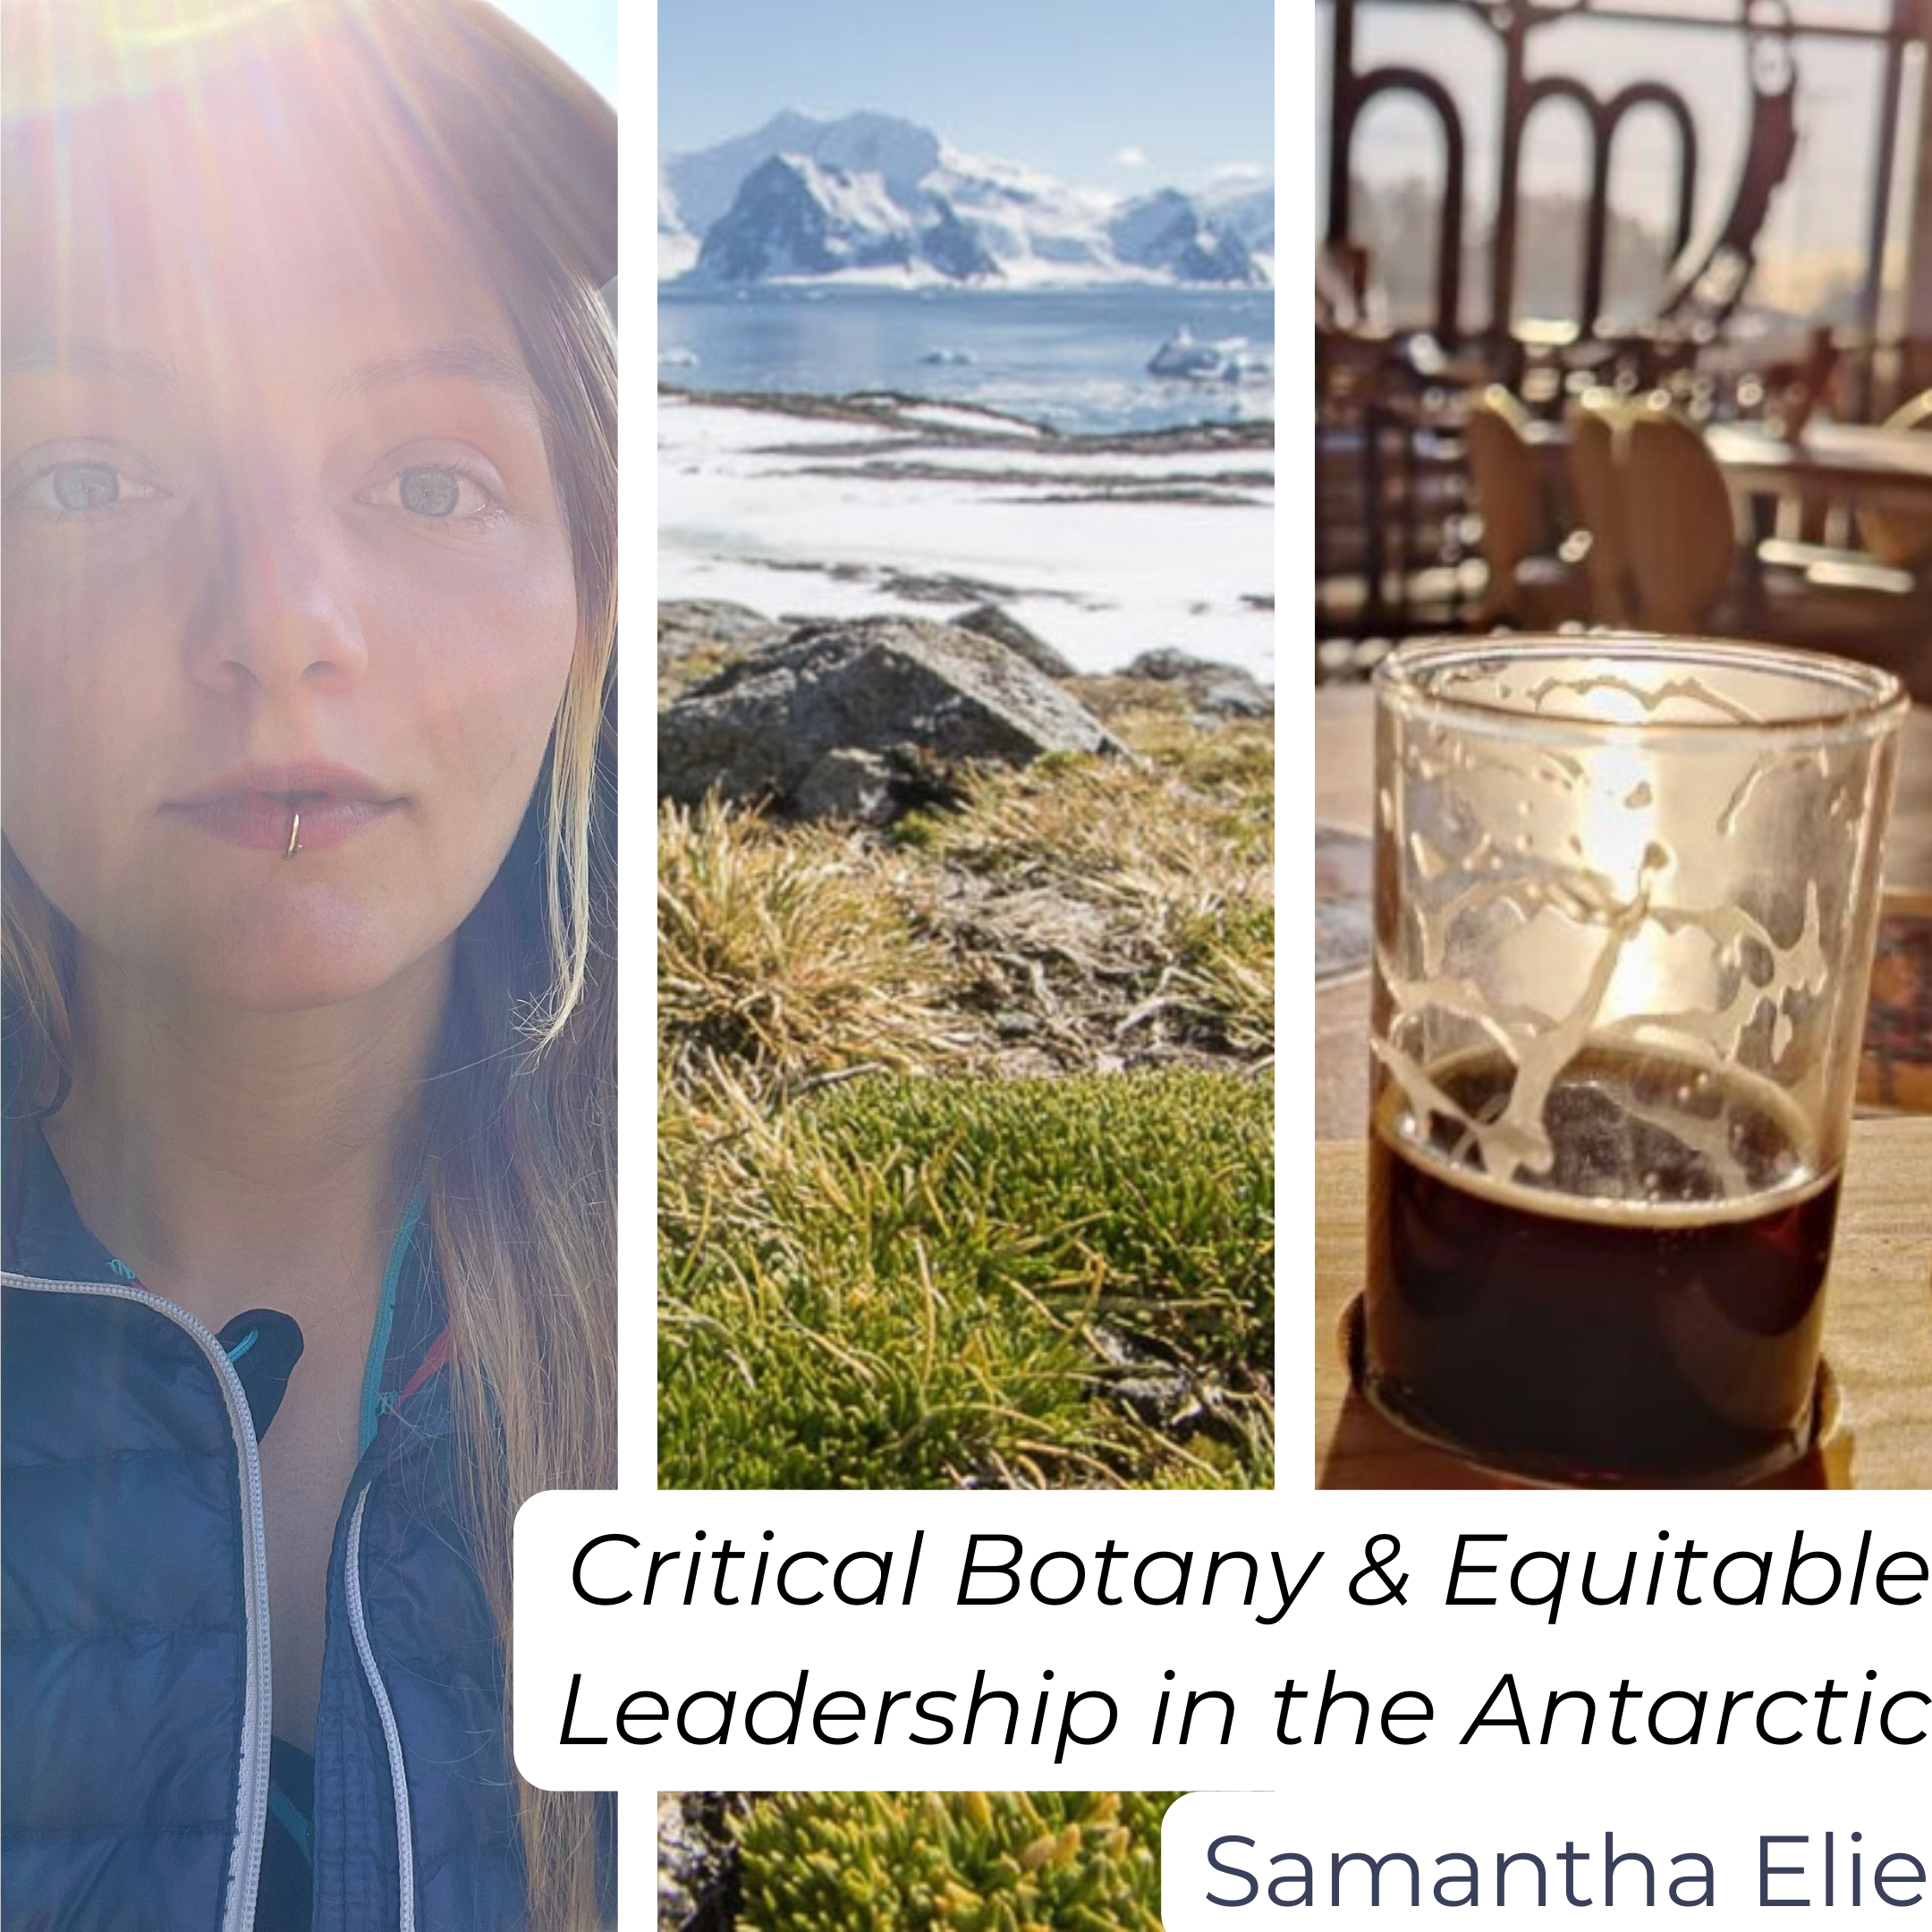 Critical Botany & Equitable Leadership in the Antarctic Compilation image of Samantha, Antarctic mountains and plants, and Dark Czech beer